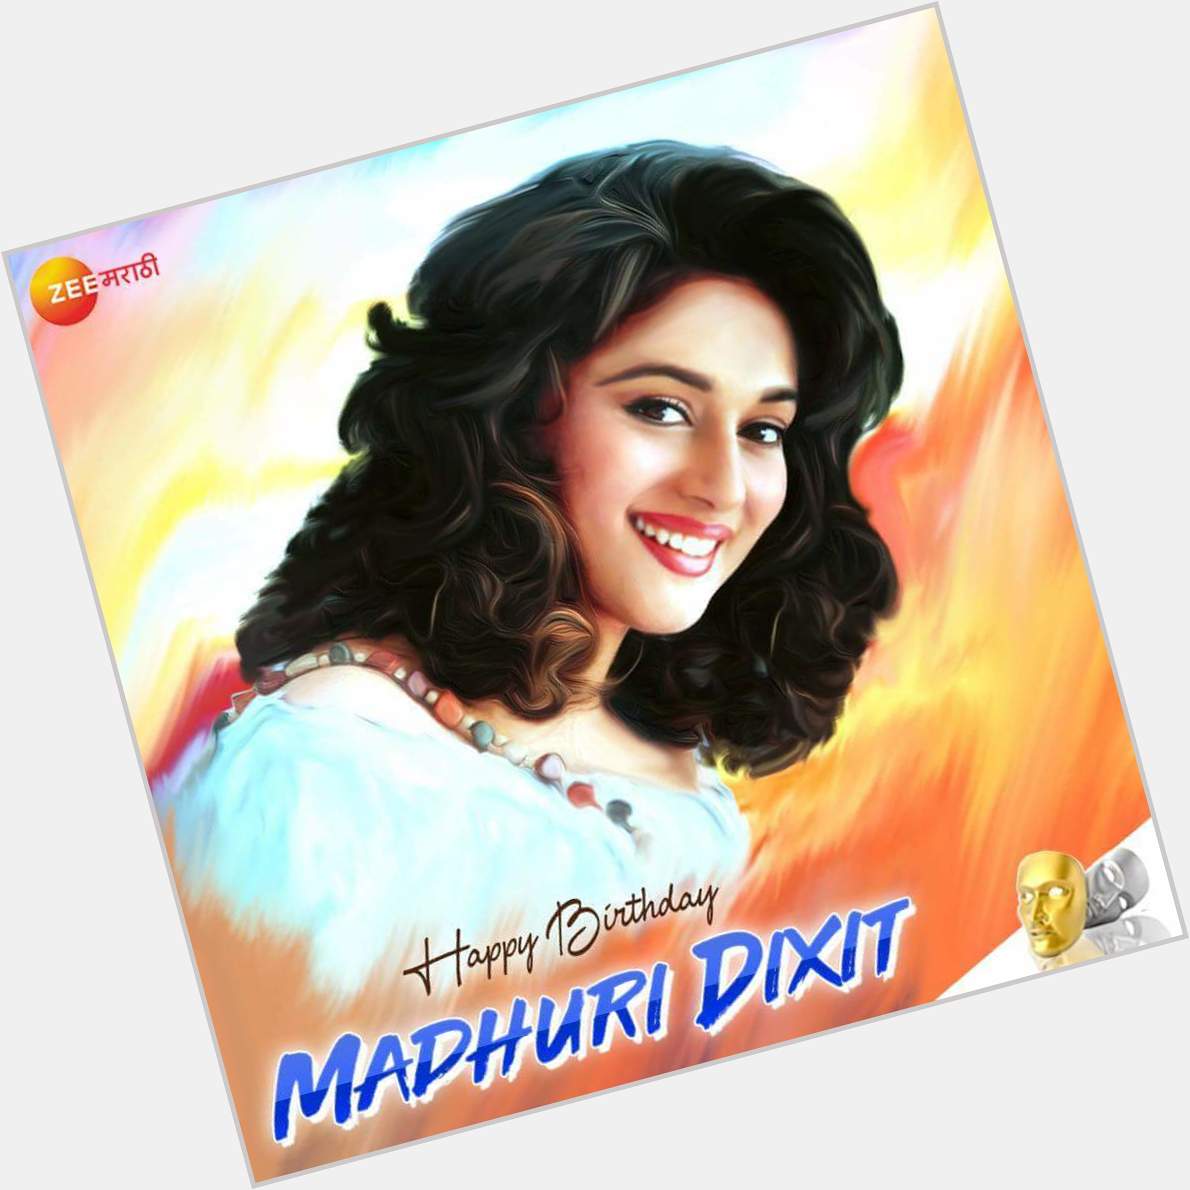  Her expressions are priceless .

Happy Birthday madhuri Dixit Mam 